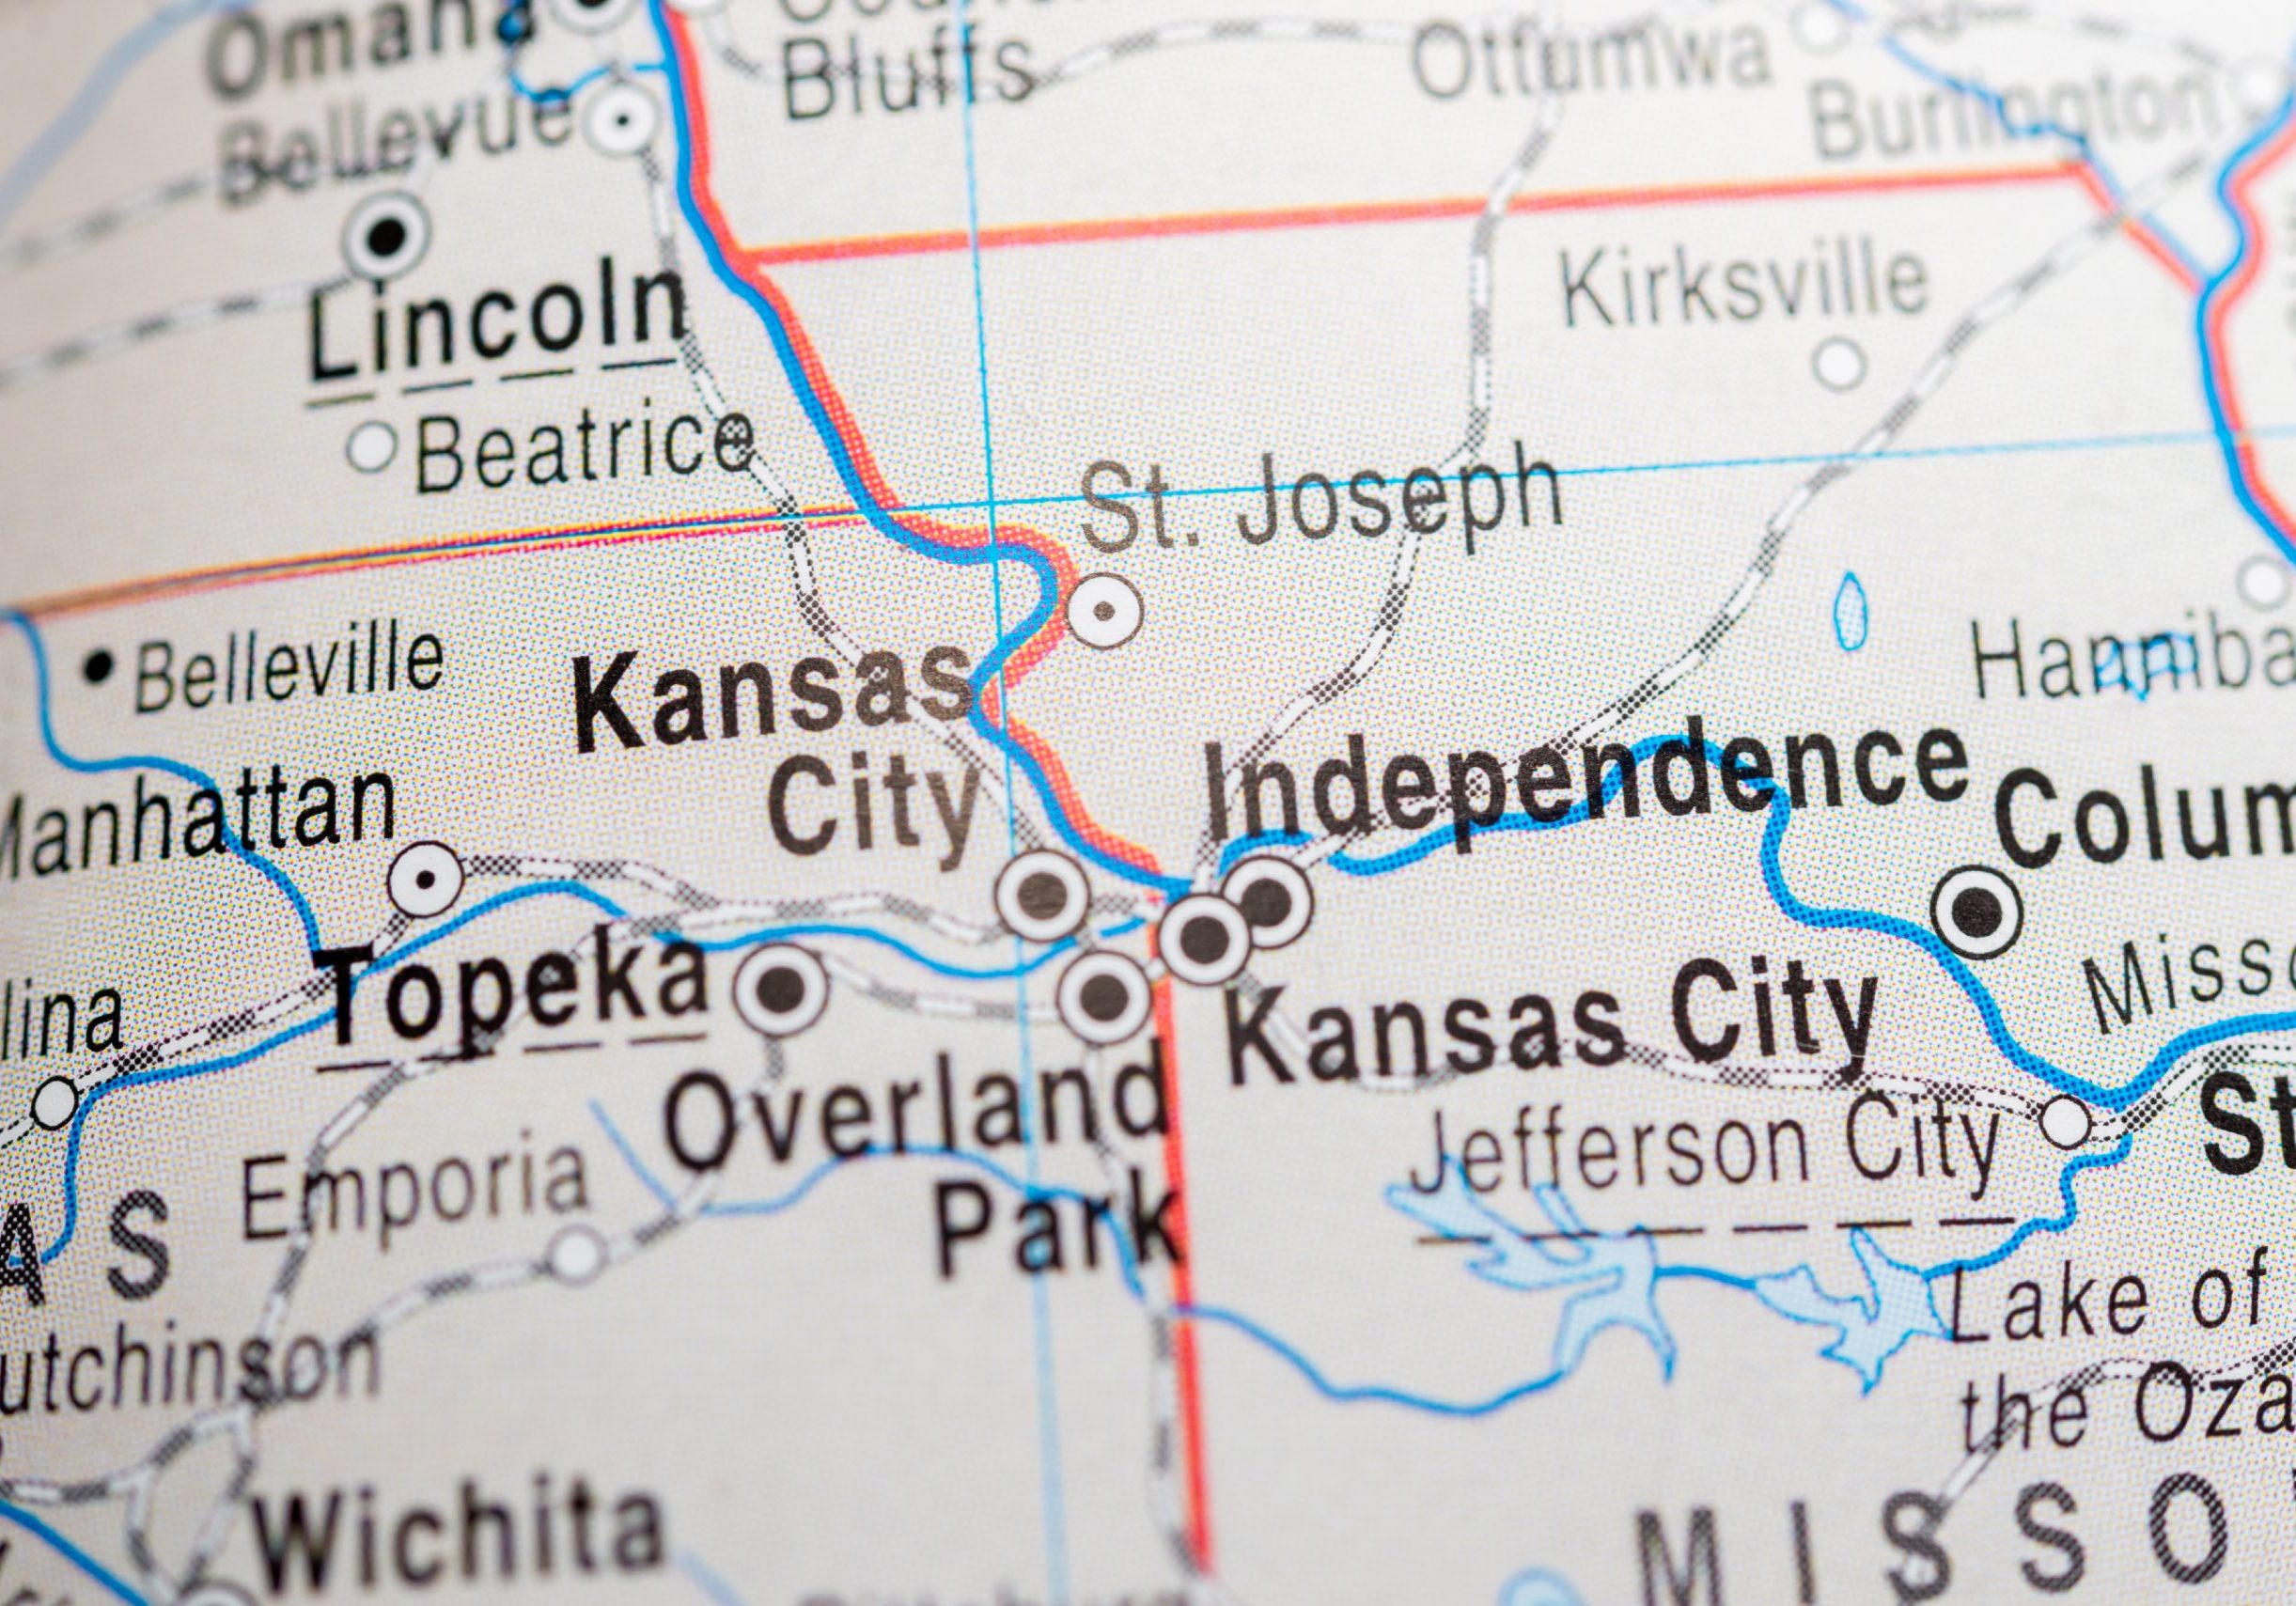 Close up of Kansas Missouri state line map border with other large cities in the area shown